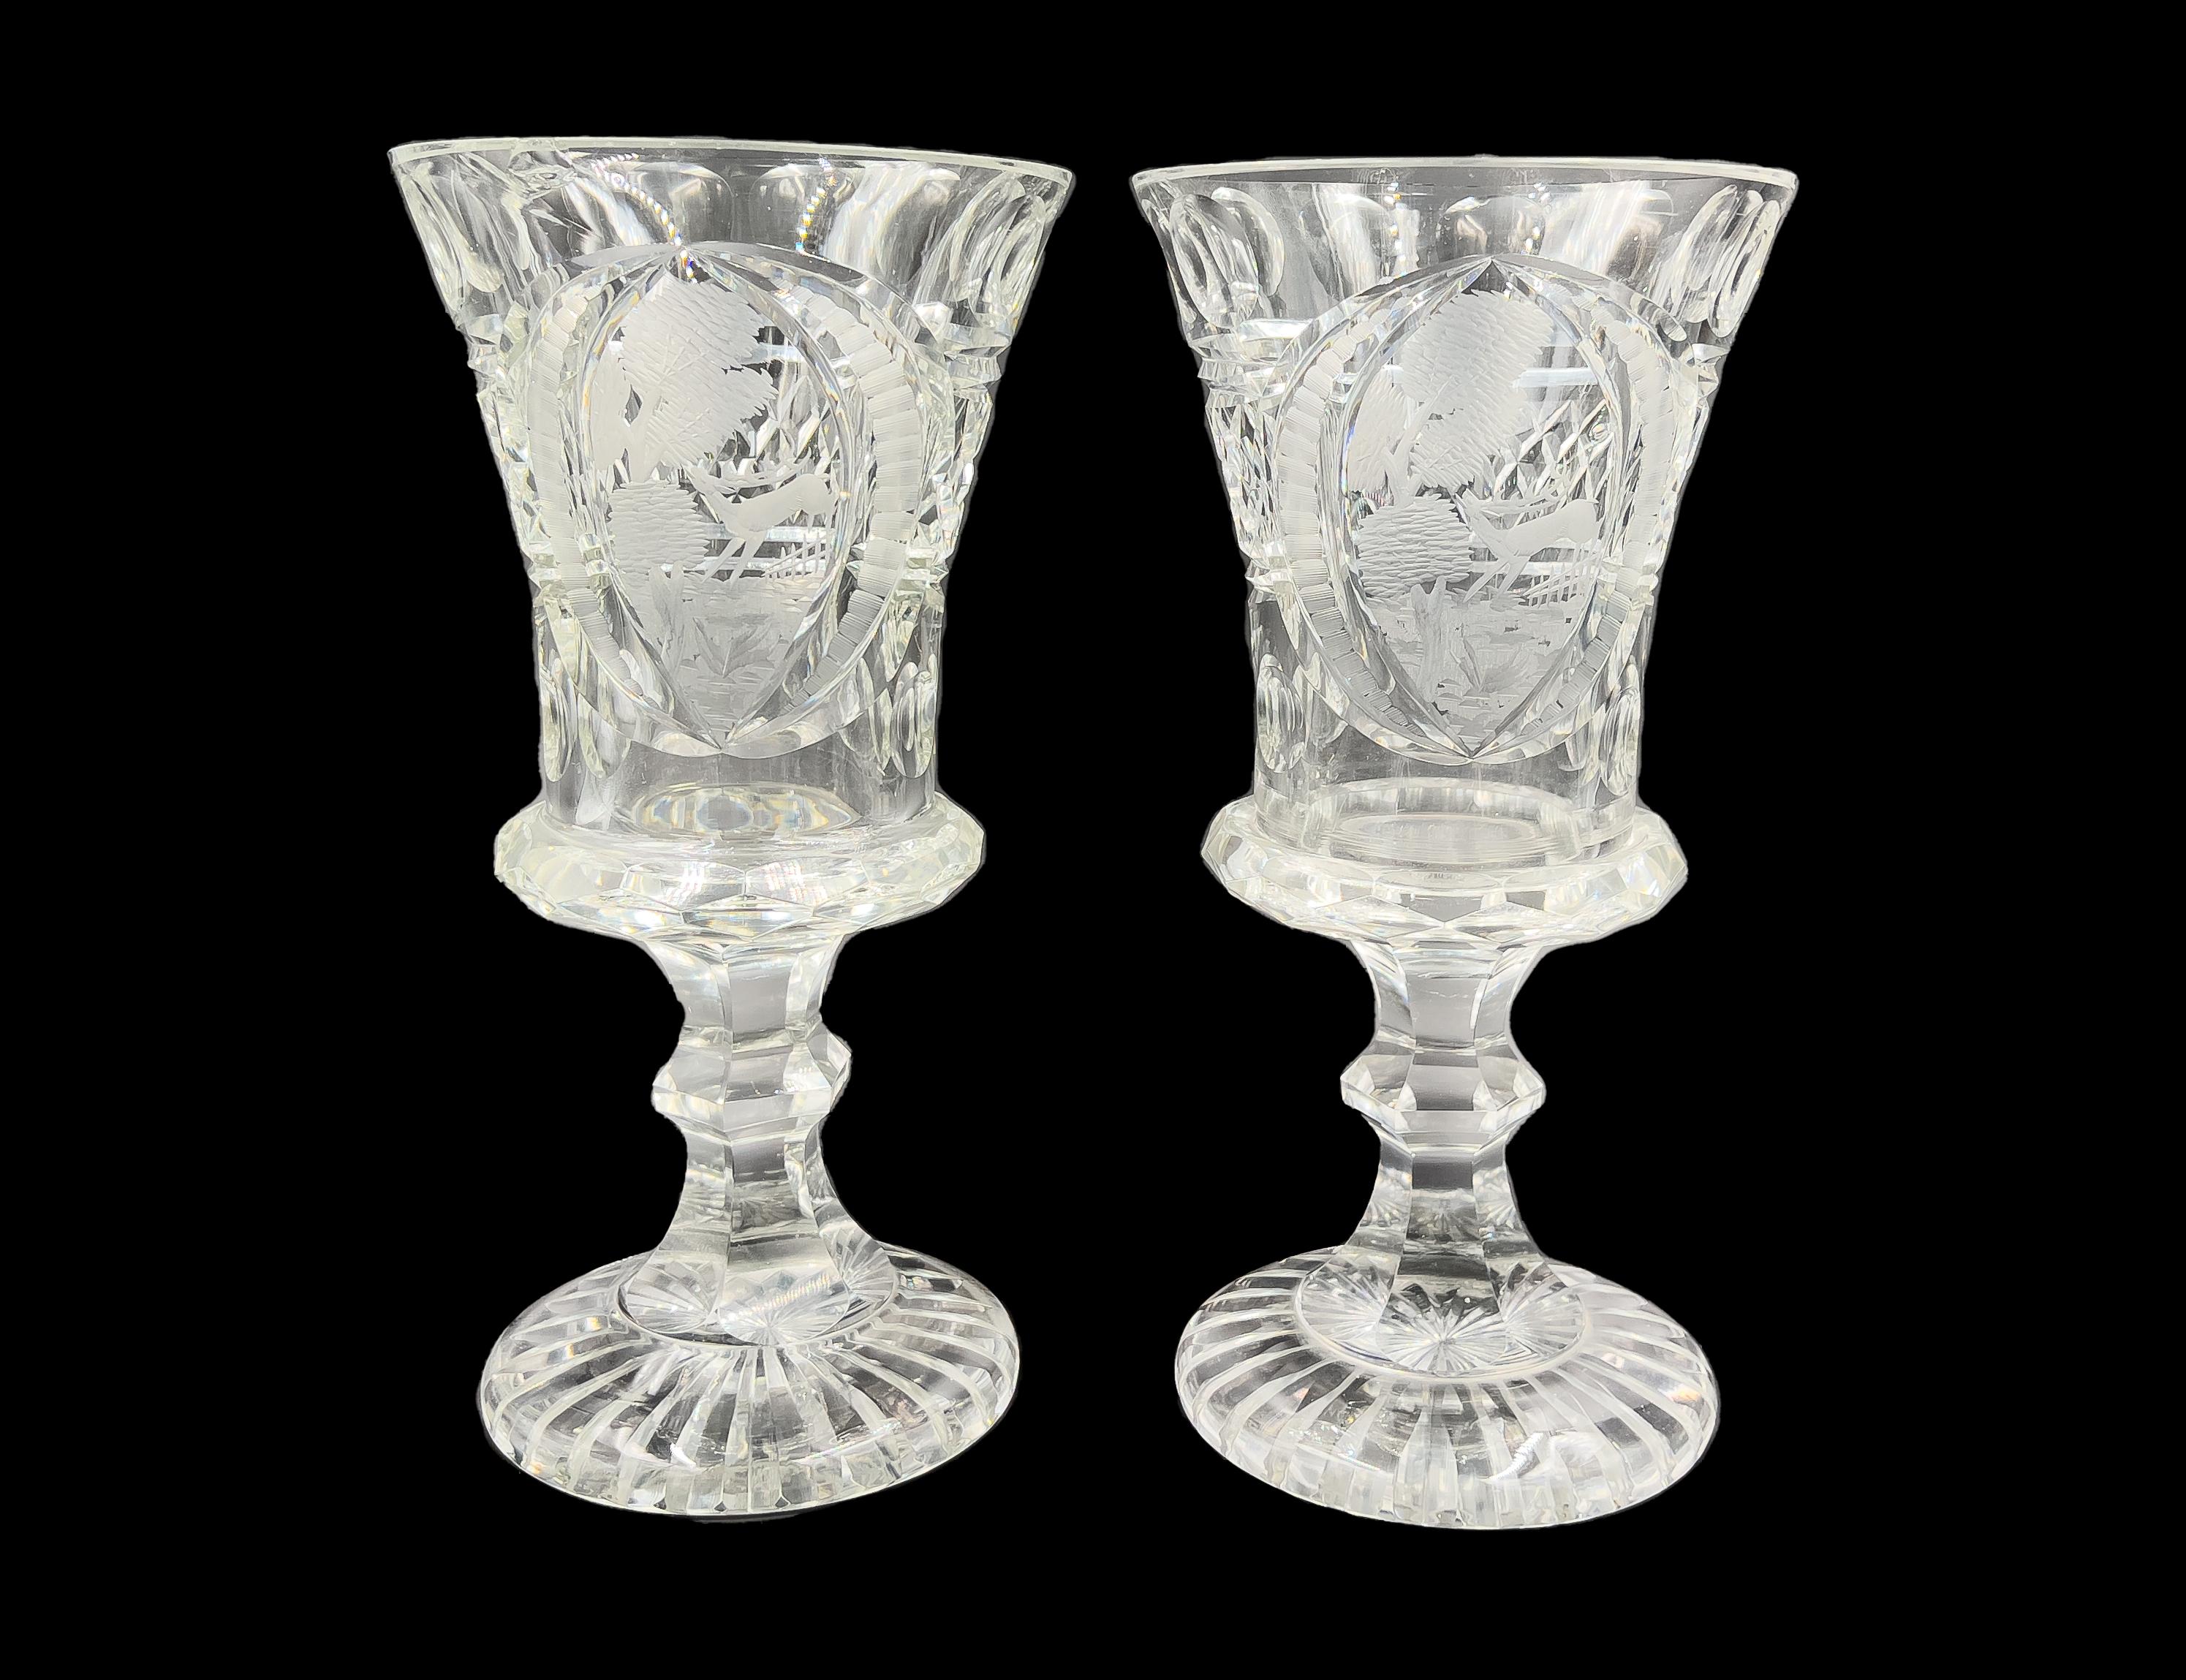 Fine Pair of Bohemian Cut and Etched Lidded Glass Vases, Late 19th/Early 20th  For Sale 3